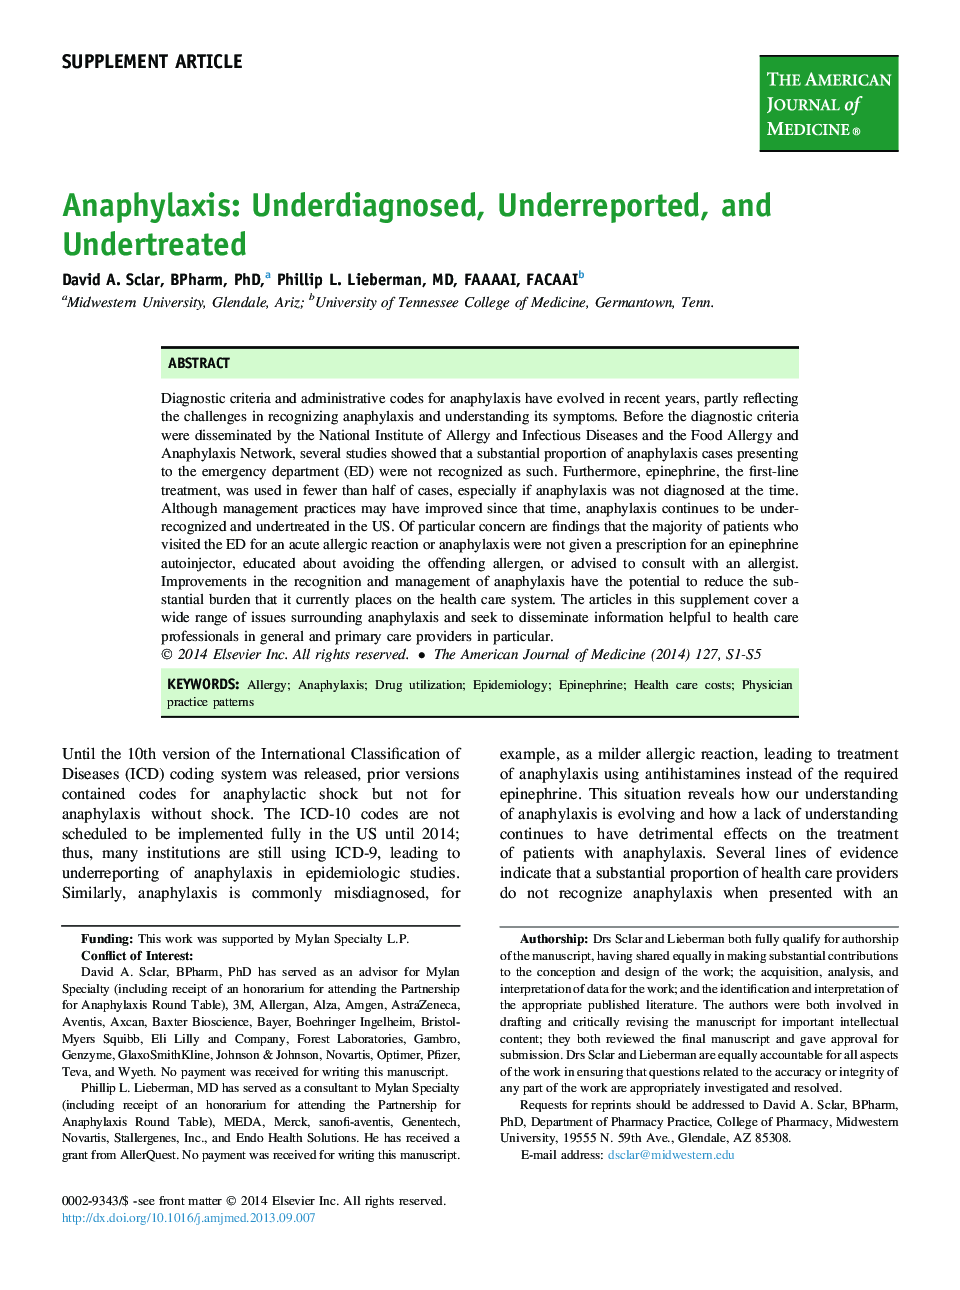 Anaphylaxis: Underdiagnosed, Underreported, and Undertreated 